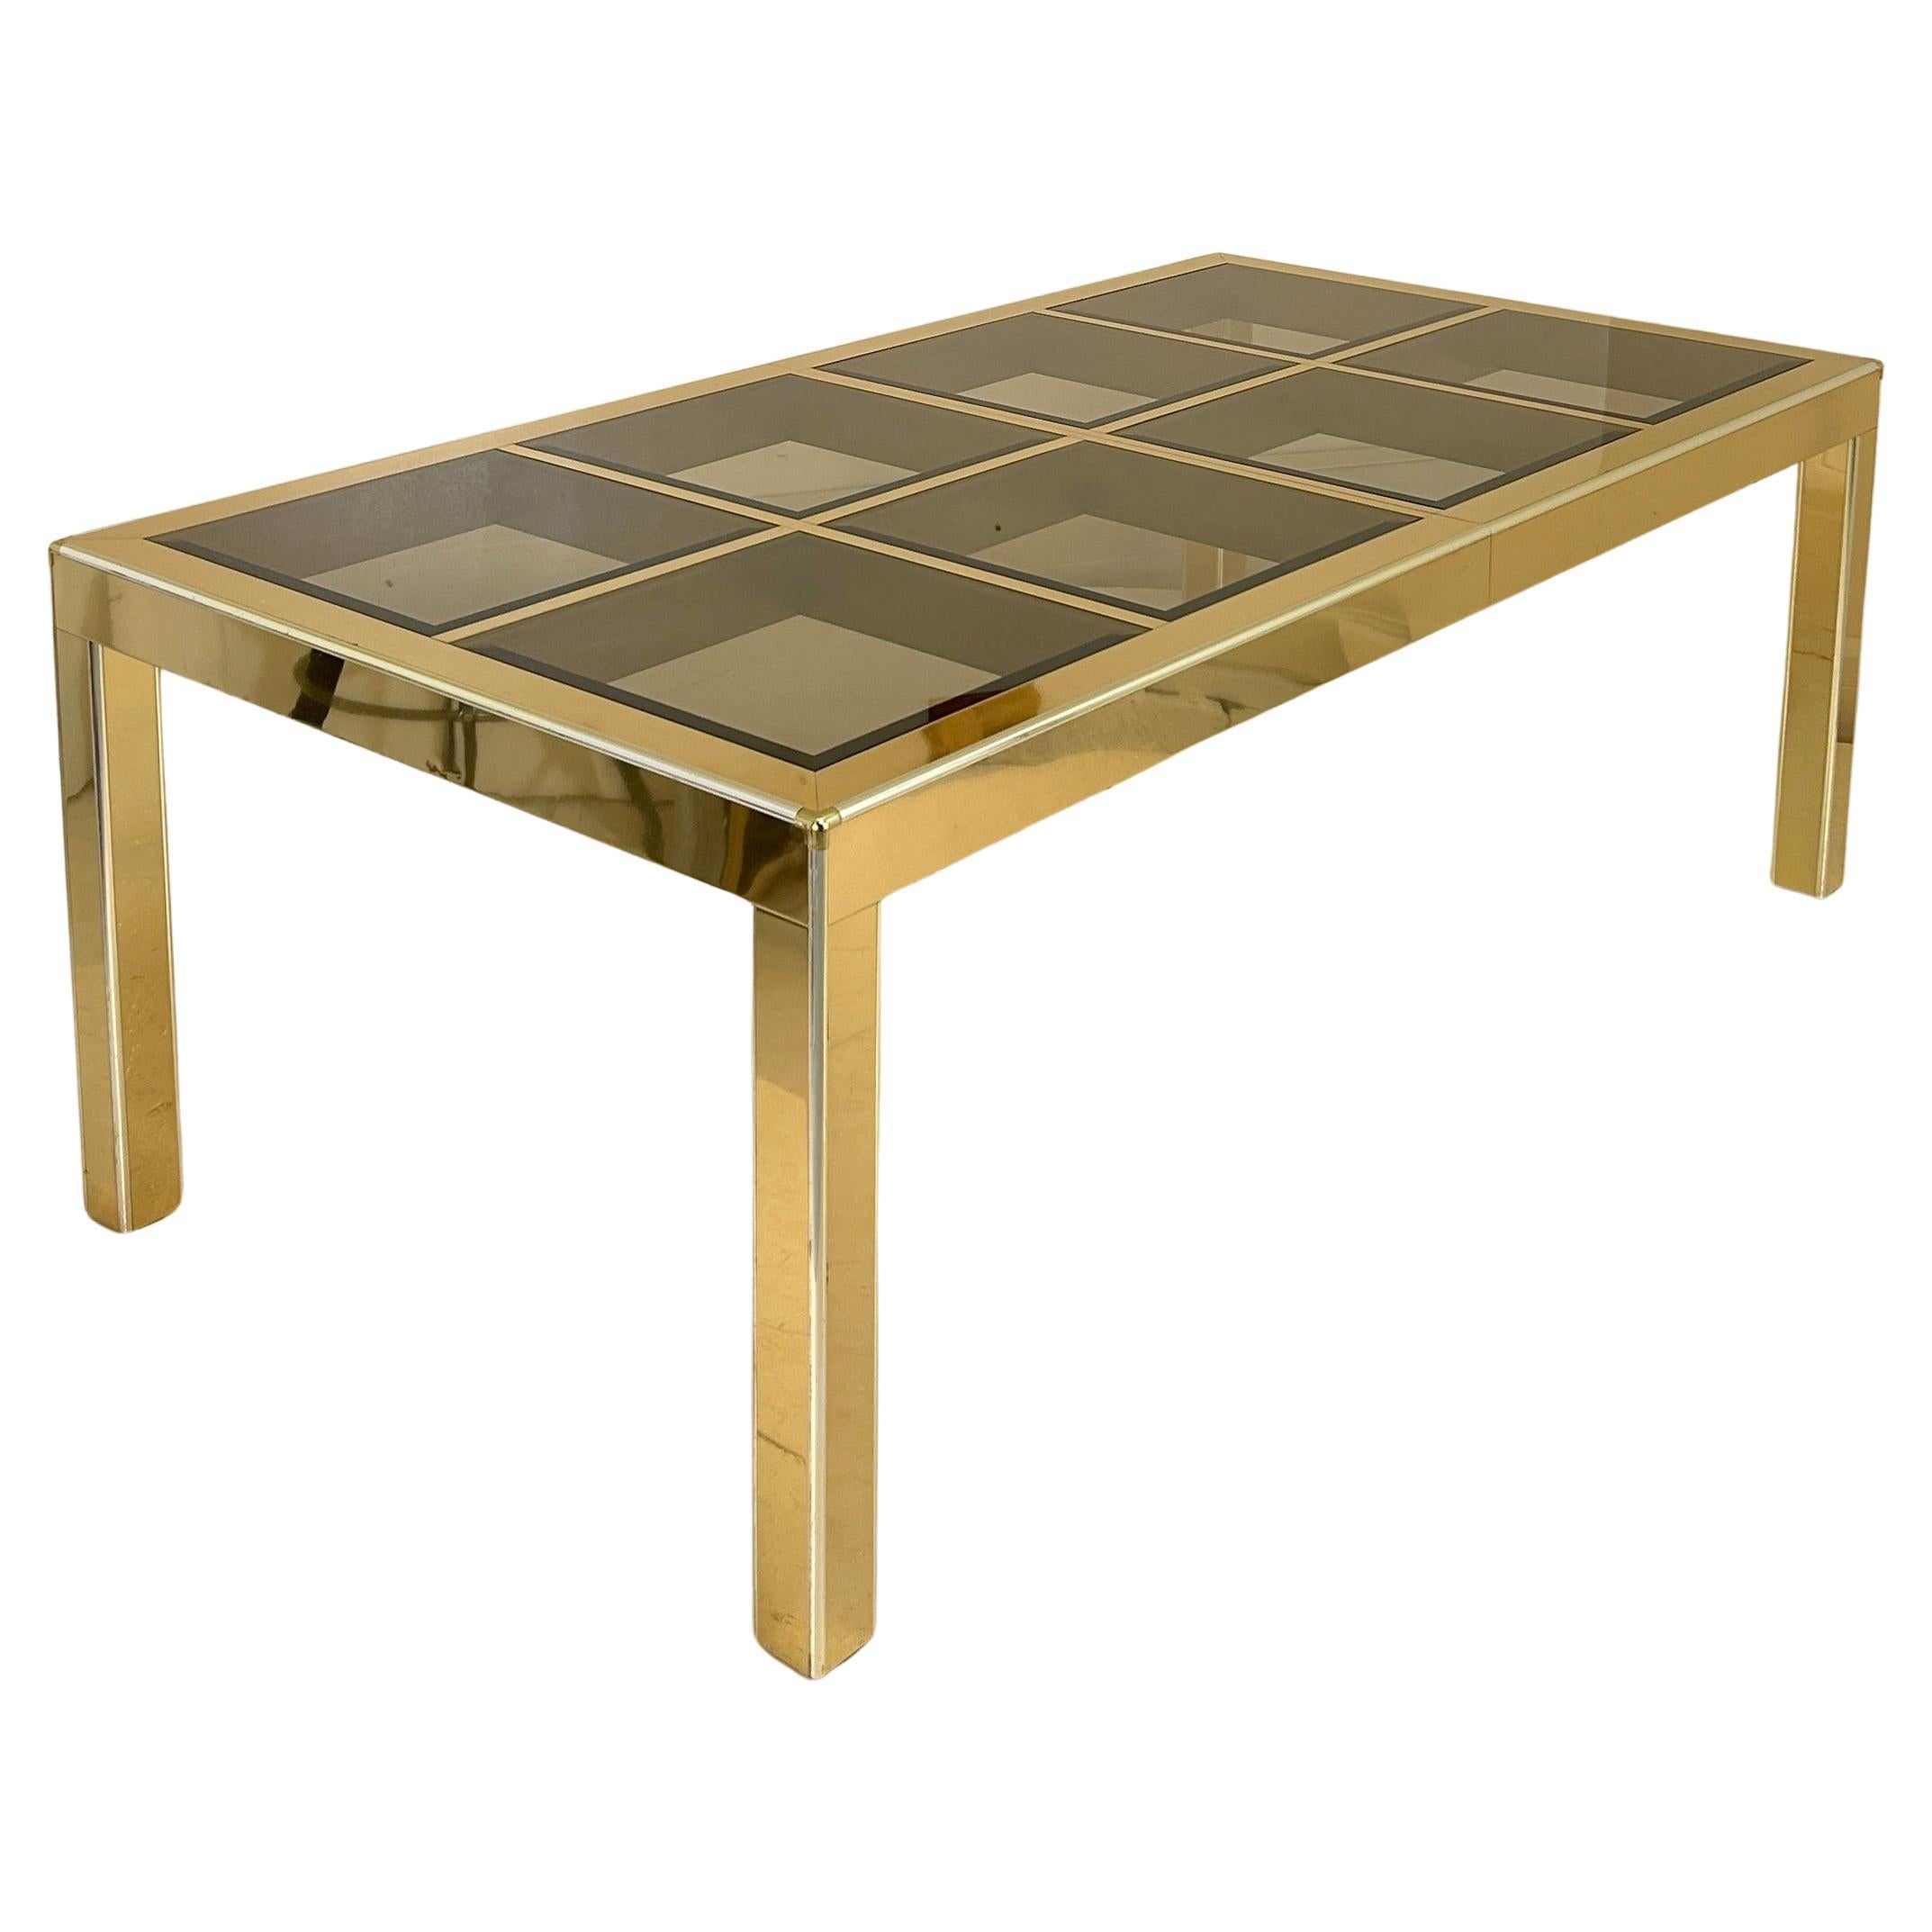 Mastercraft Brass Dining Table with glass inserts